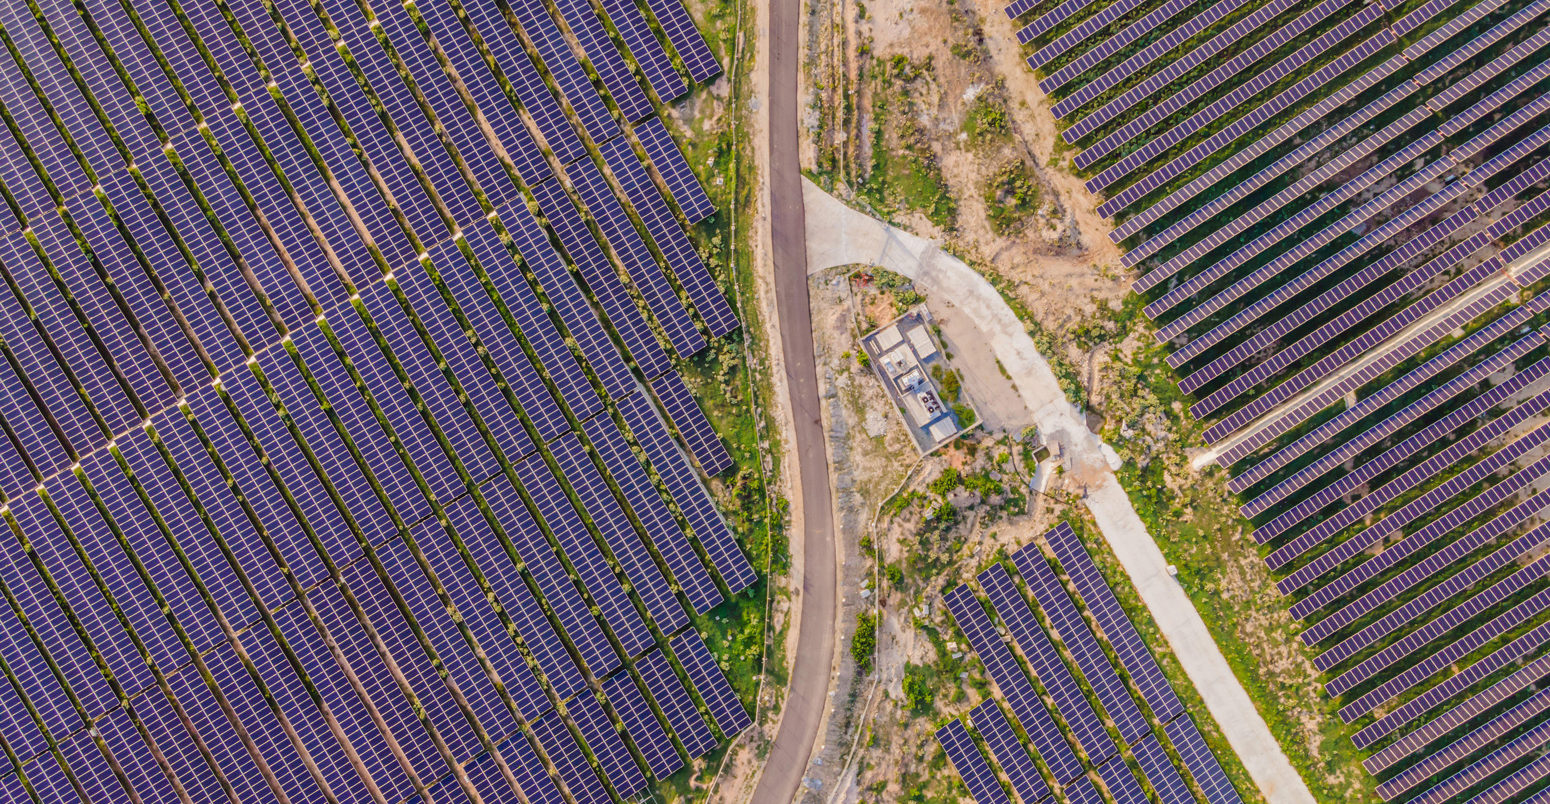 Aerial view of solar panels in a solar farm in Thailand.